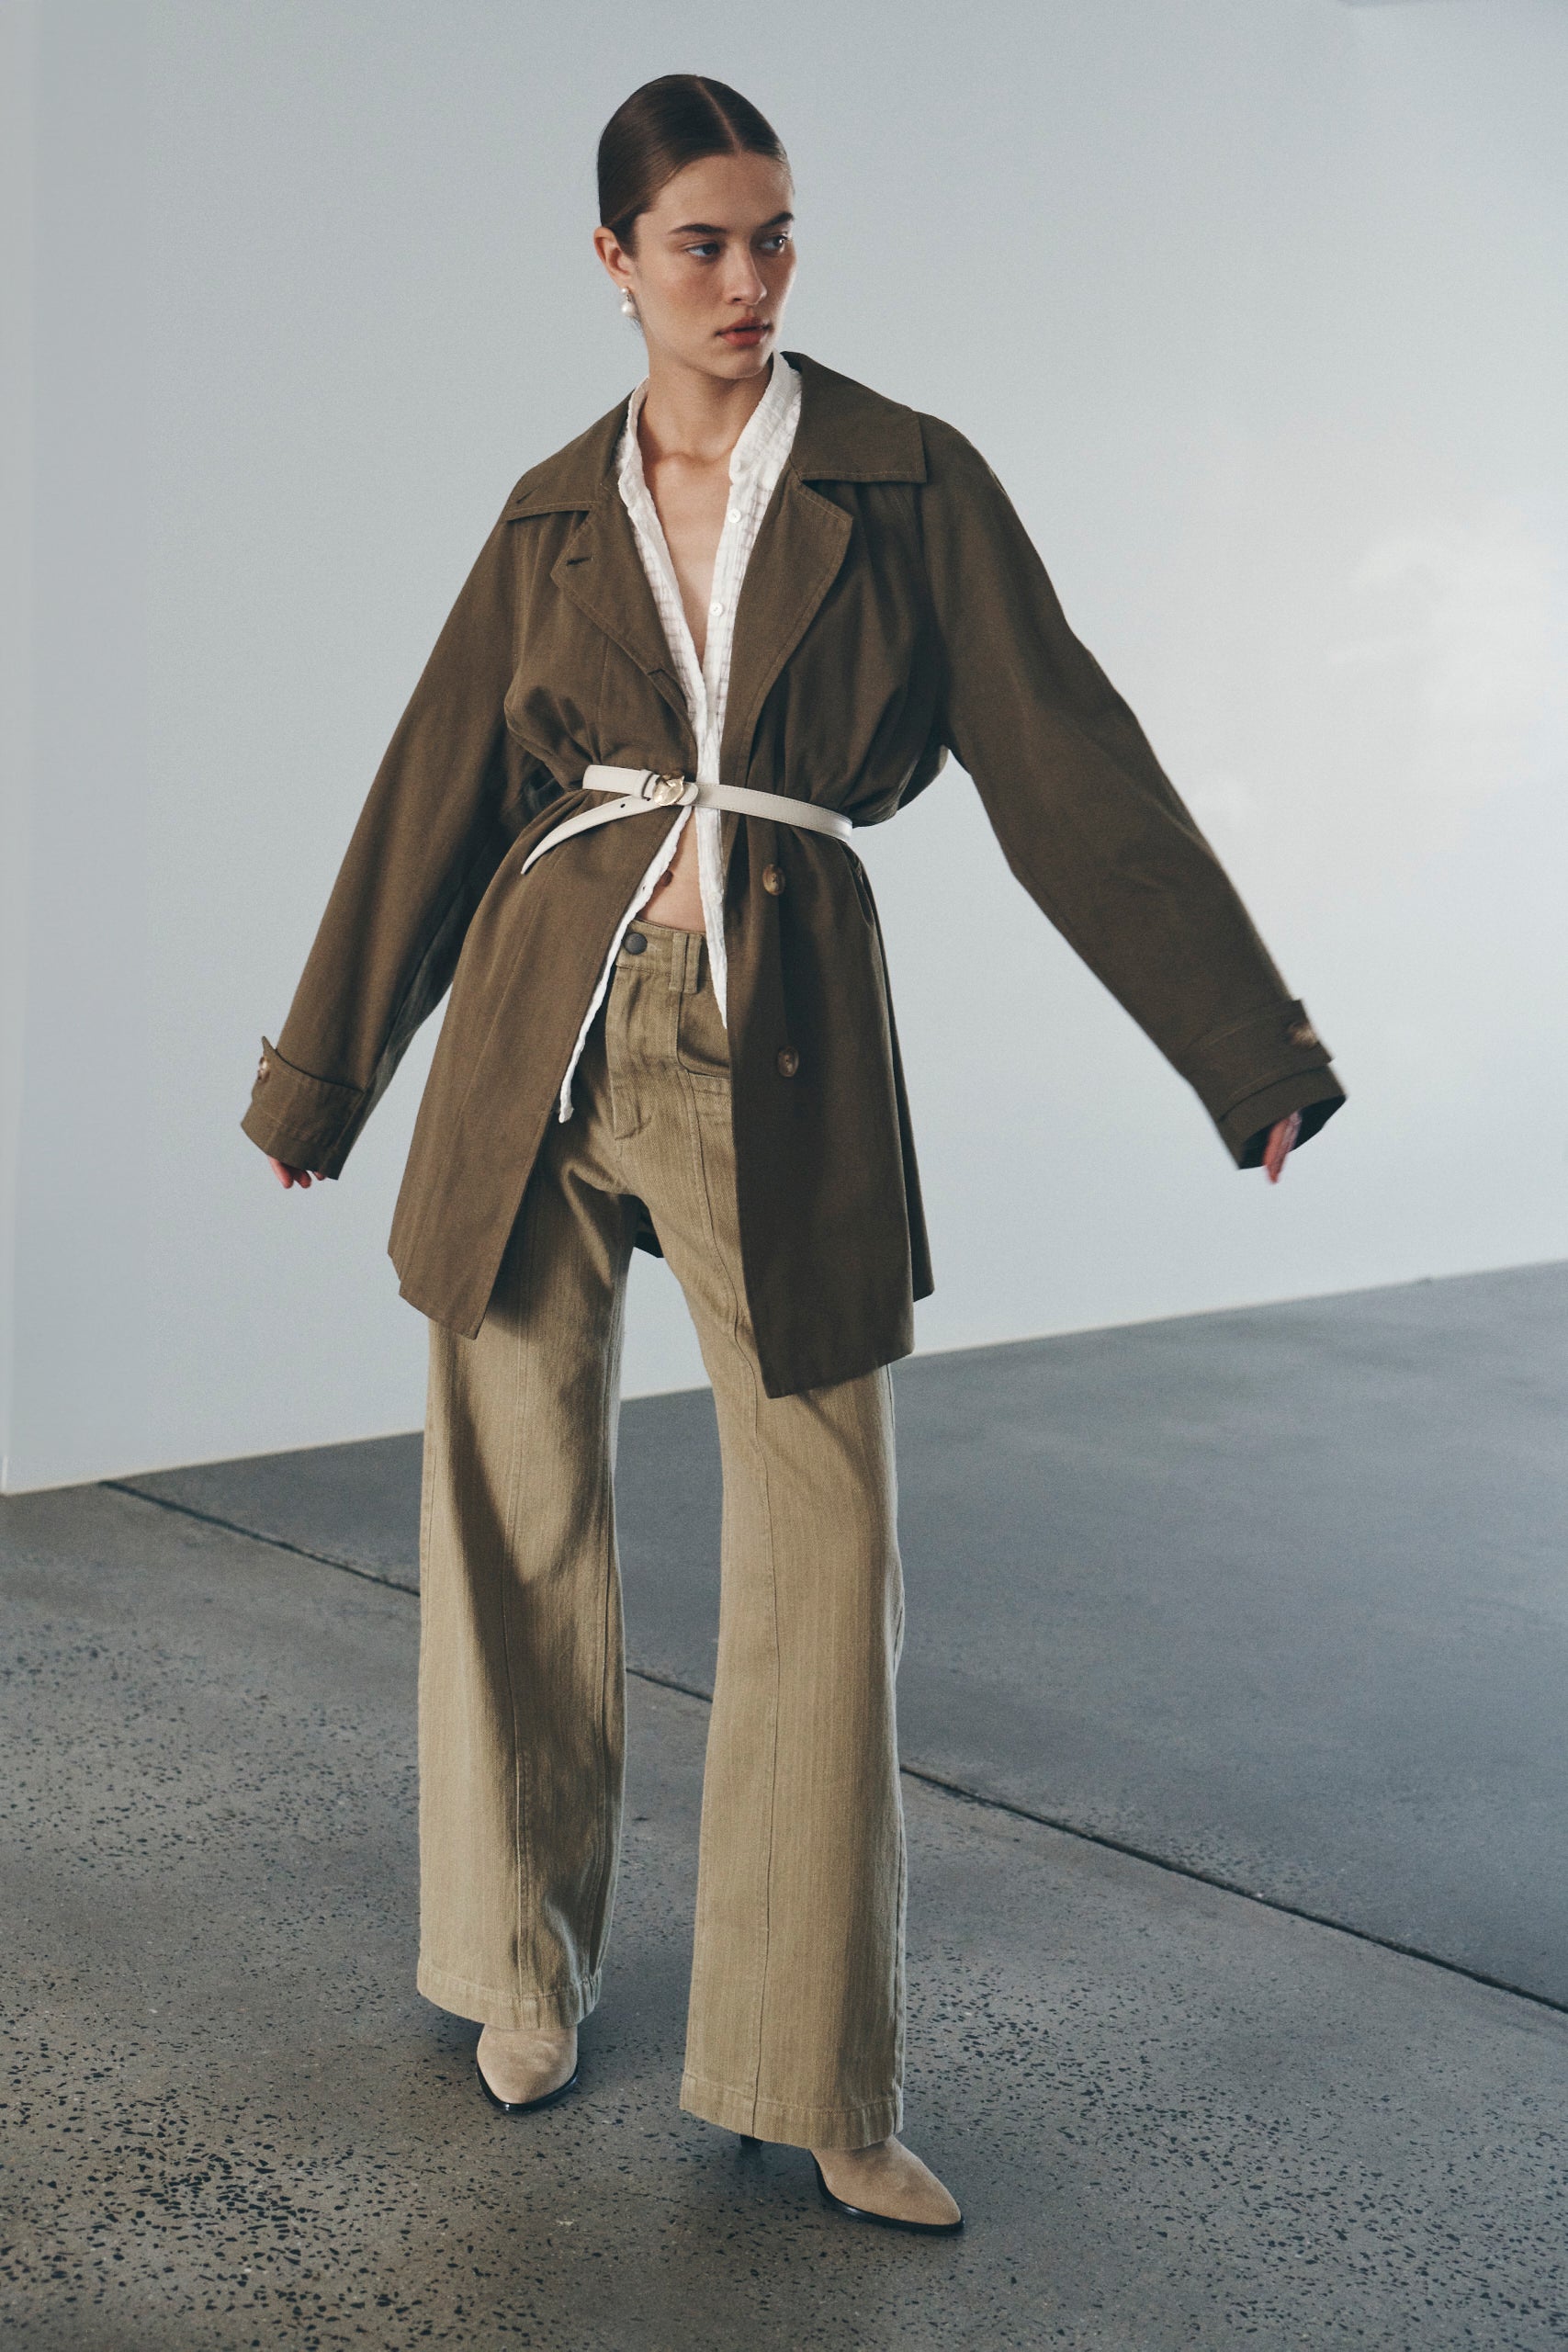 Bianca wears the Valentina Trench Jacket, Cora Blouse, and Gio Jeans. She accessorises with pearl drop earrings, a skinny white belt, and brown suede knee-high boots. Bianca completes the look with a low, slick bun. 